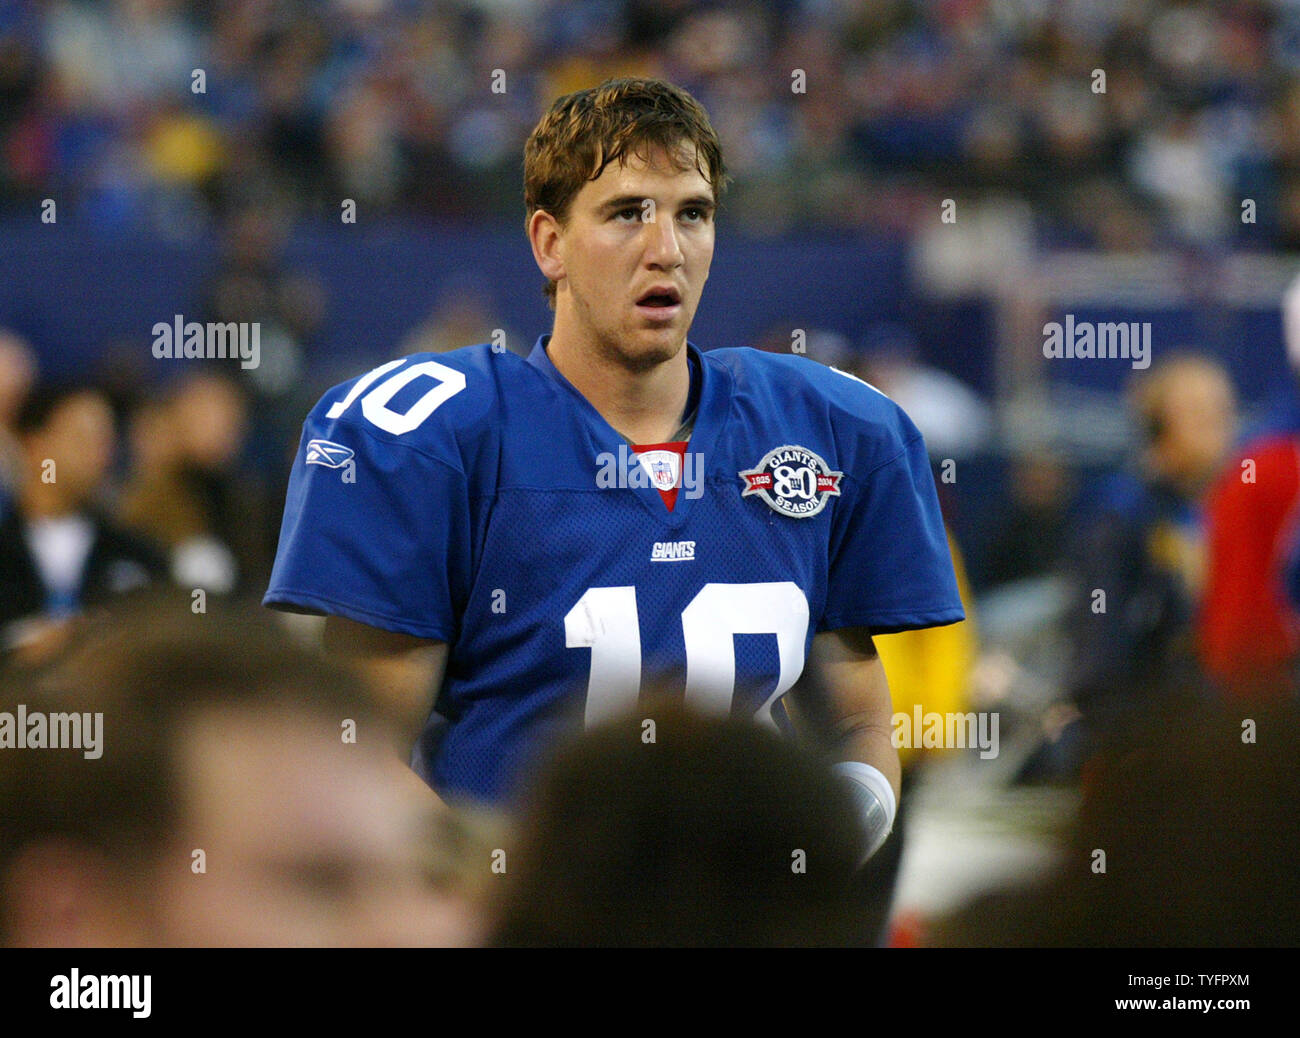 New York Giants quarterback Eli Manning looks confused on the sidelines in  the first quarter. The Atlanta Falcons defeated the New York Giants 14 to 7  at Giants Stadium in East Rutherford